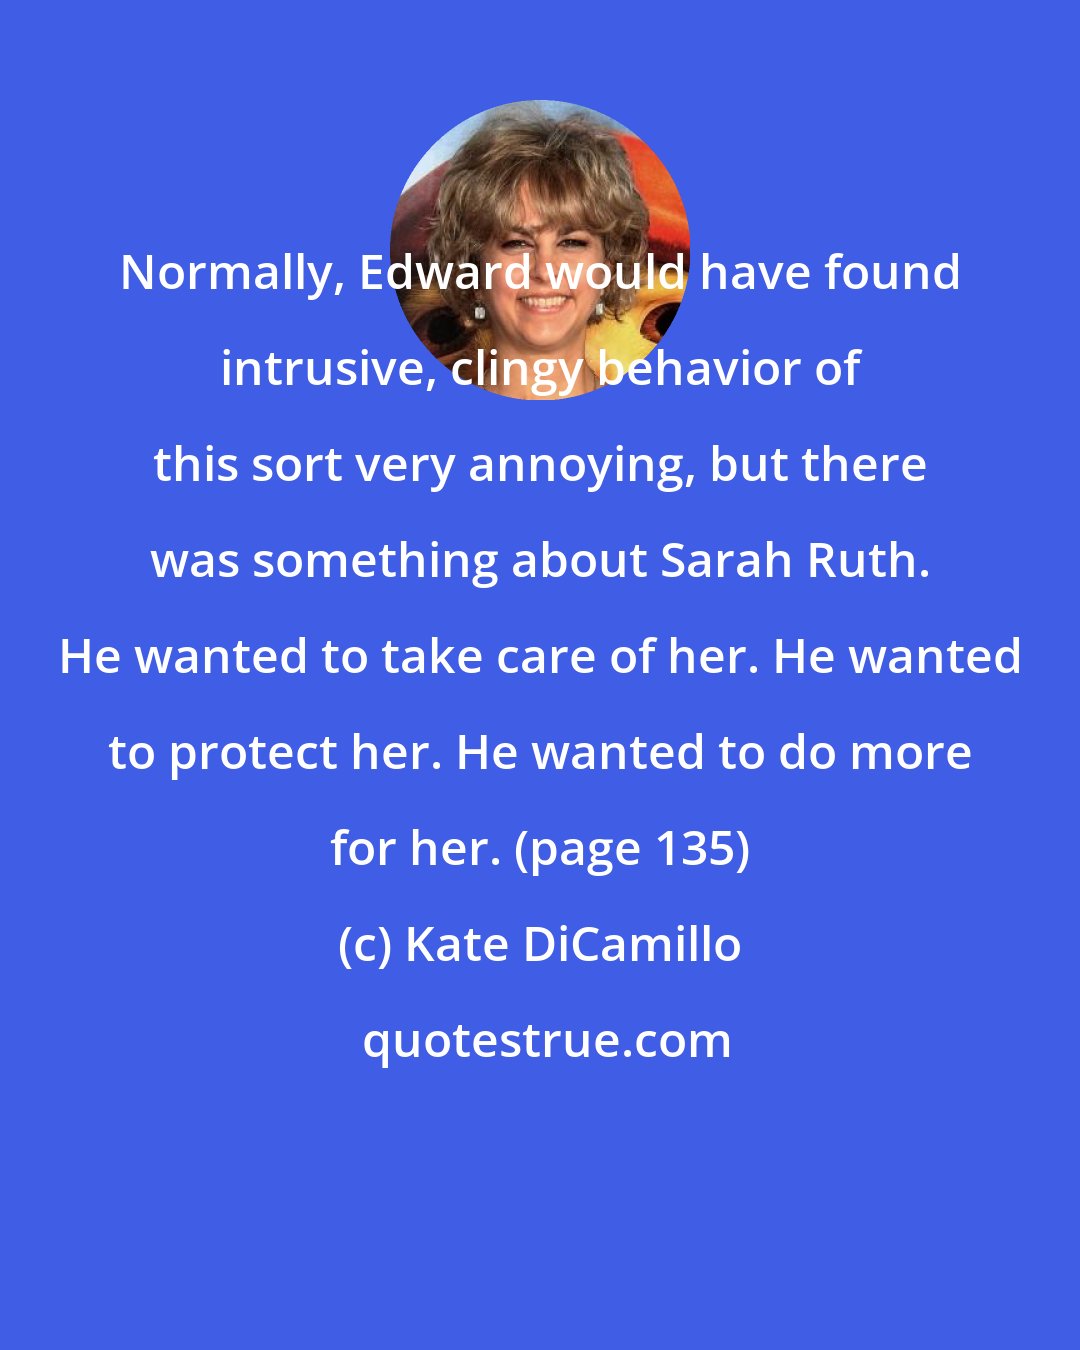 Kate DiCamillo: Normally, Edward would have found intrusive, clingy behavior of this sort very annoying, but there was something about Sarah Ruth. He wanted to take care of her. He wanted to protect her. He wanted to do more for her. (page 135)